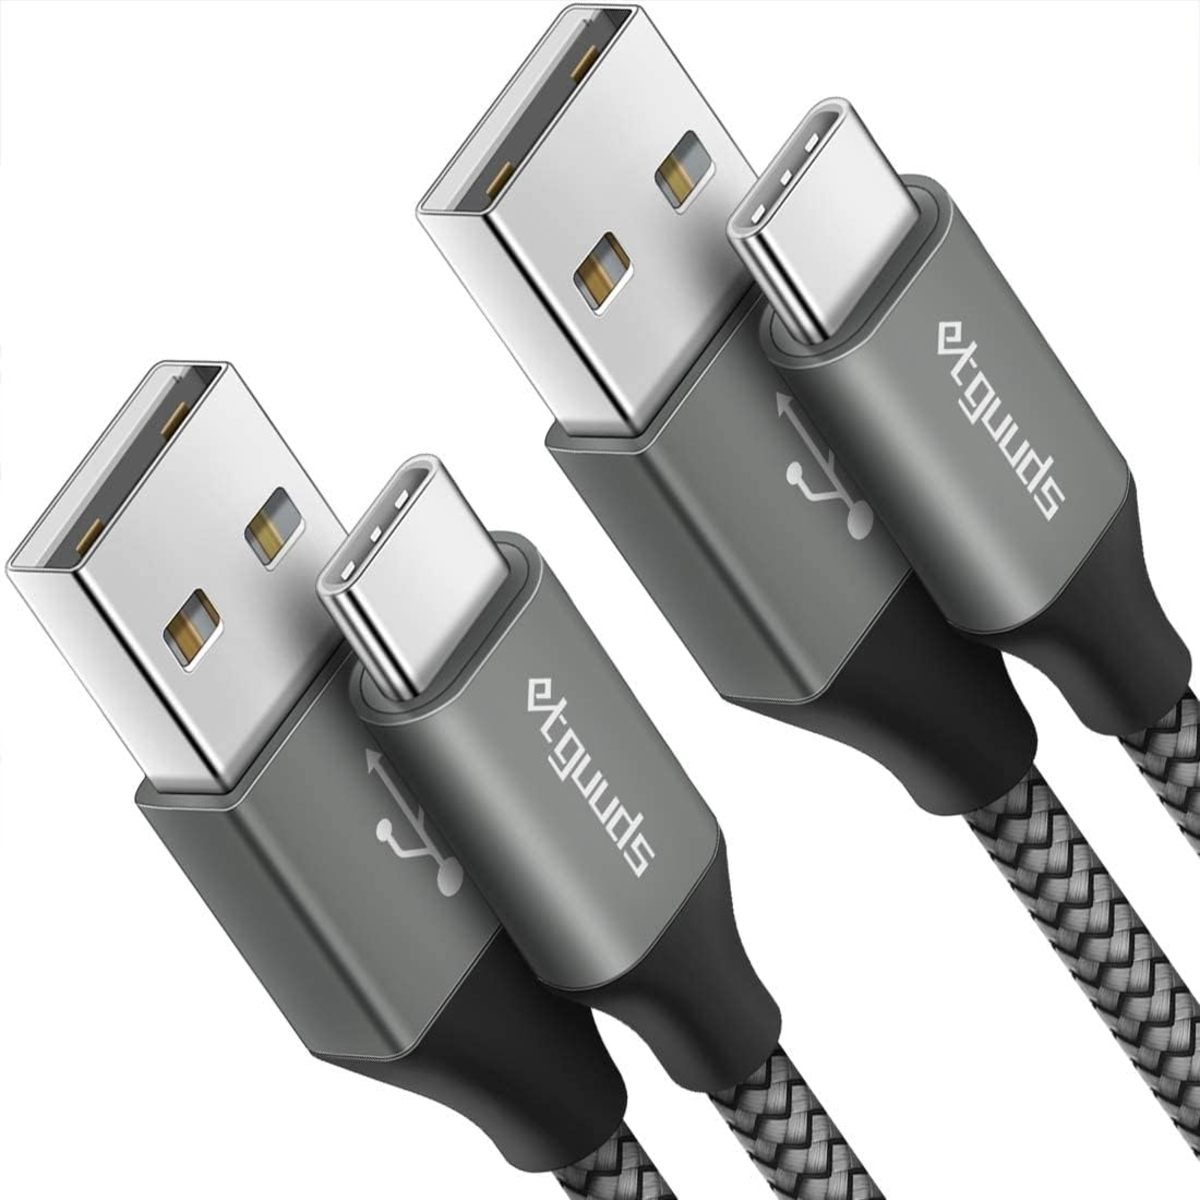 Etguuds USB-C Cables